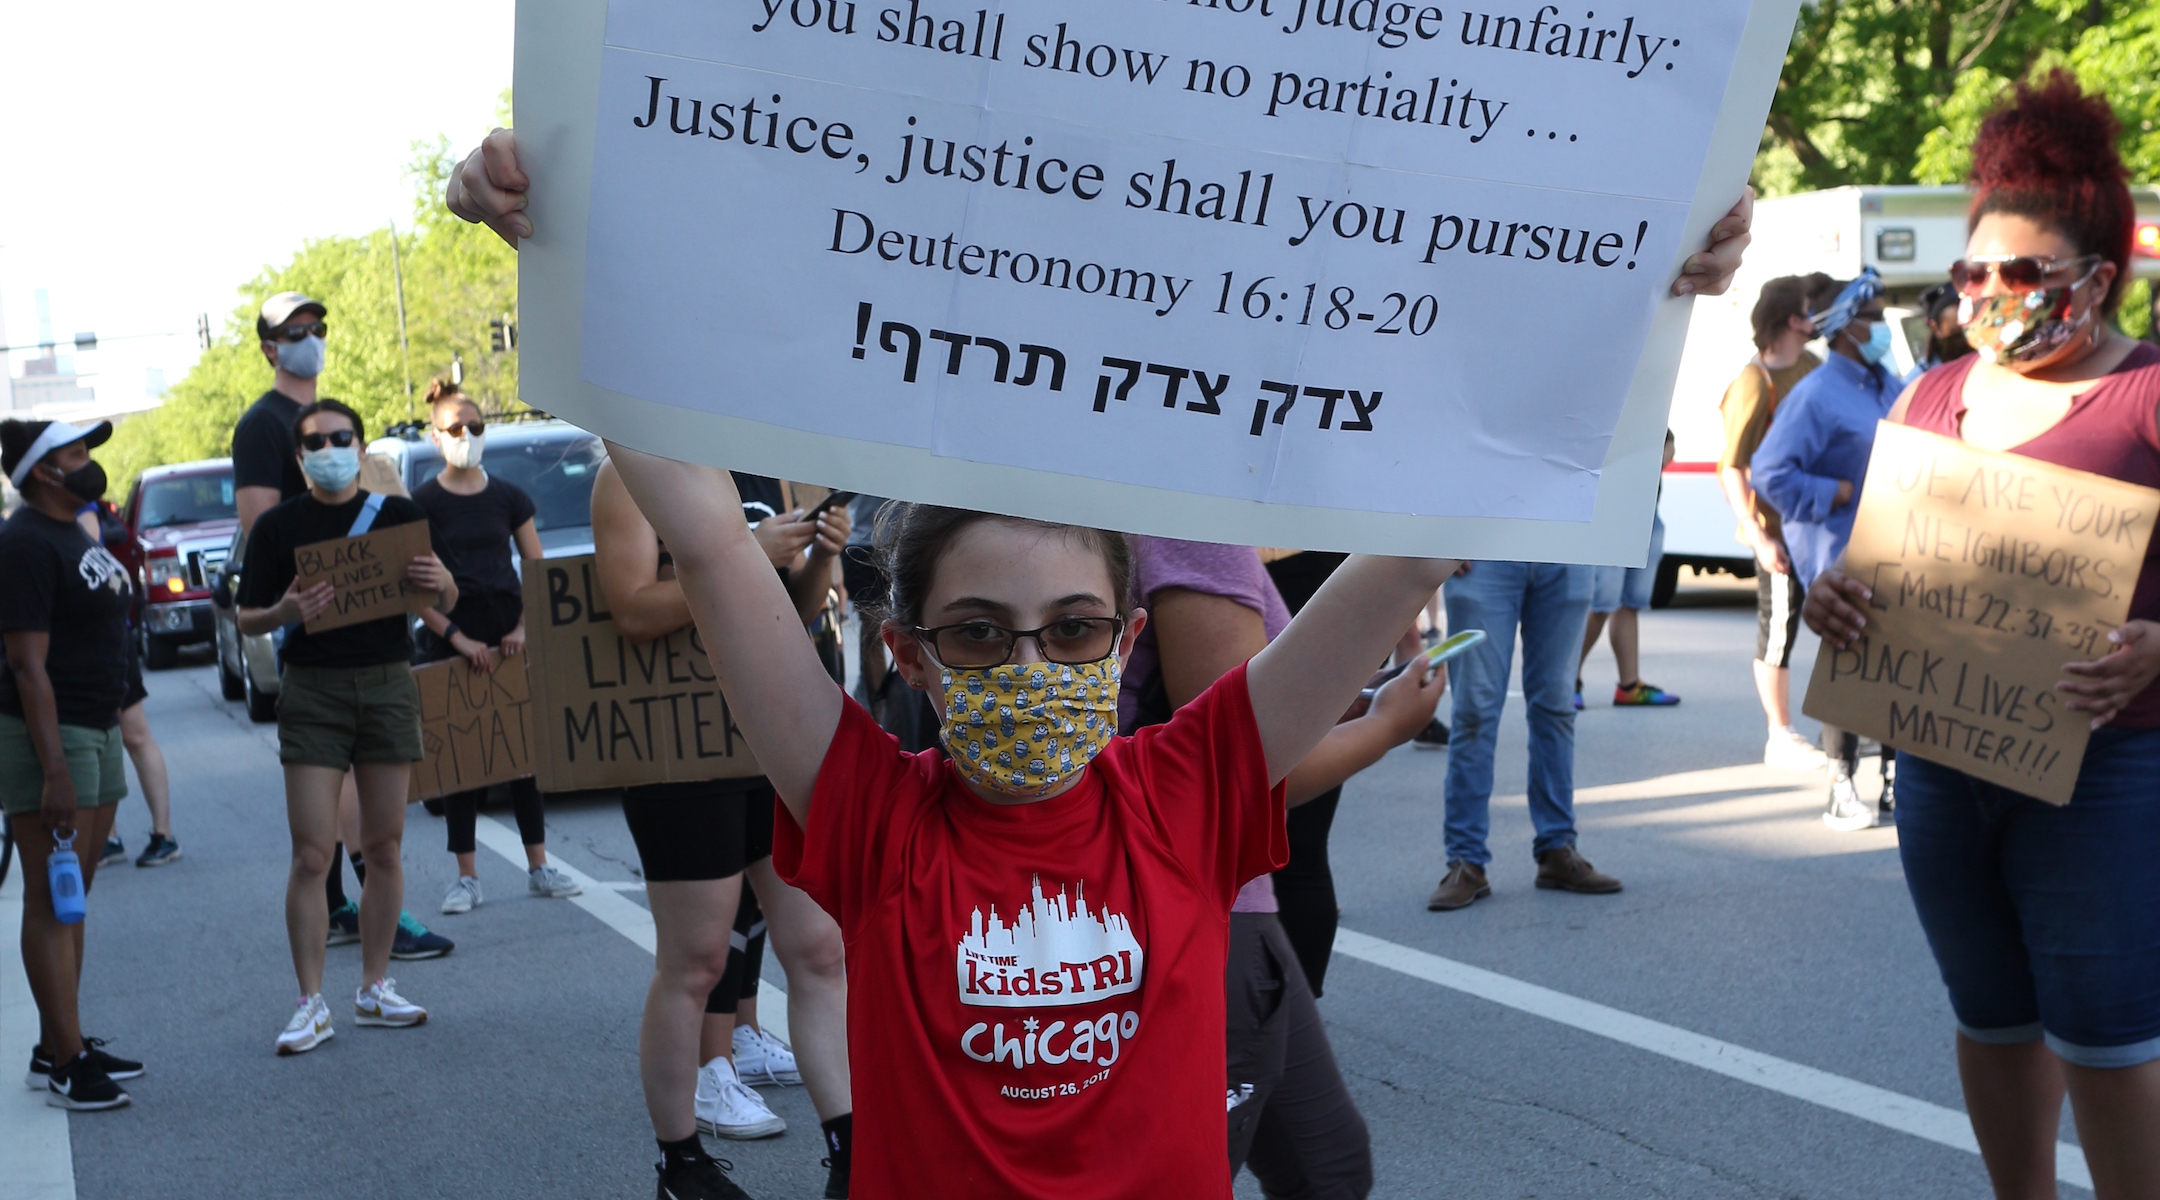 A Jewish demonstrator holds up a sign quoting the Torah in Hebrew. (Ariel Tesher)